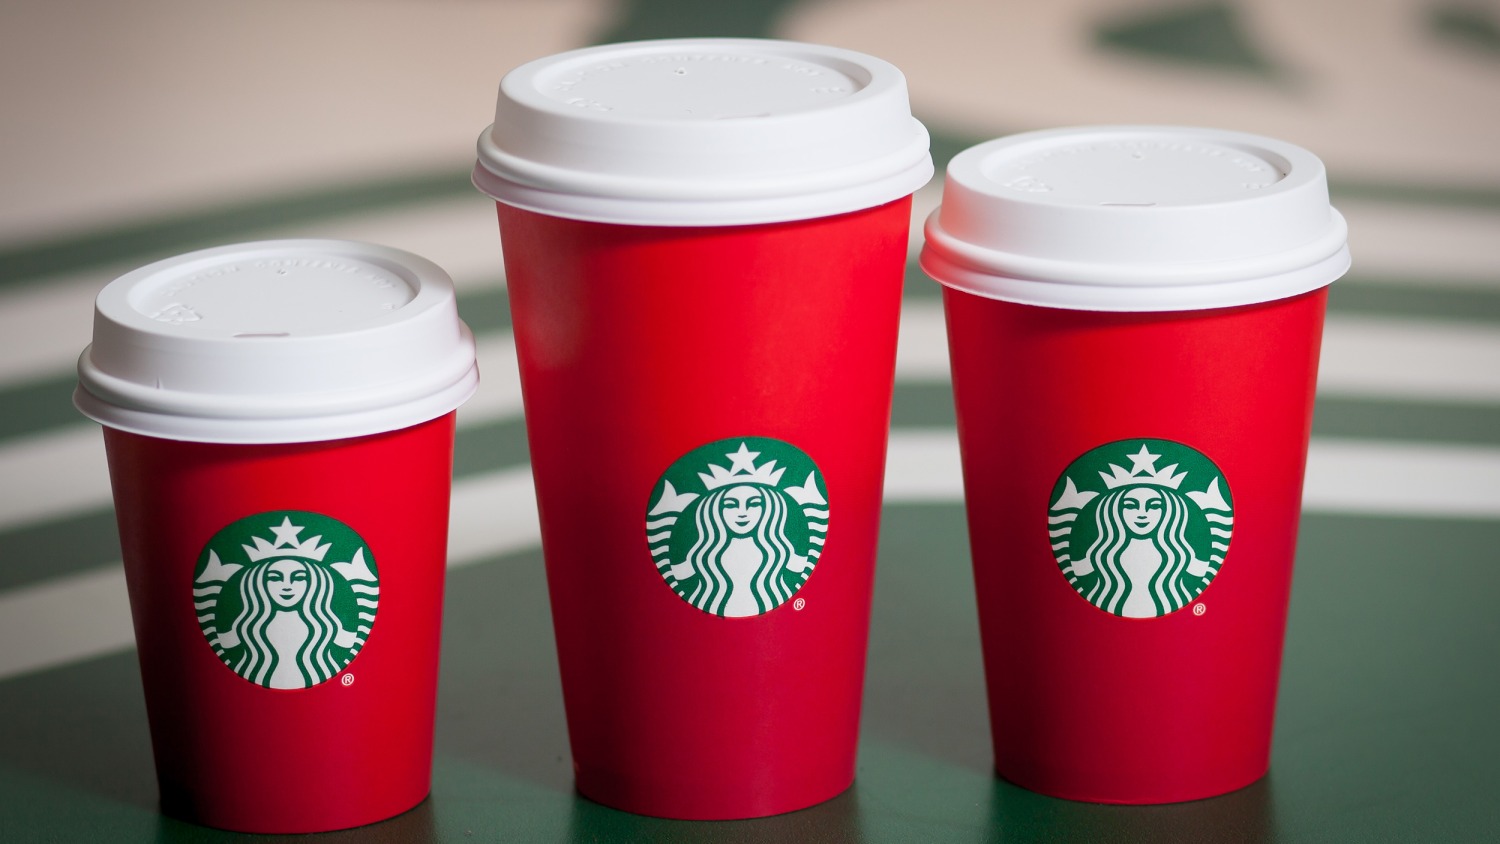 https://media-cldnry.s-nbcnews.com/image/upload/t_fit-1500w,f_auto,q_auto:best/newscms/2015_46/851711/starbucks-red-cup-controversy-today-tease-1-110915.jpg